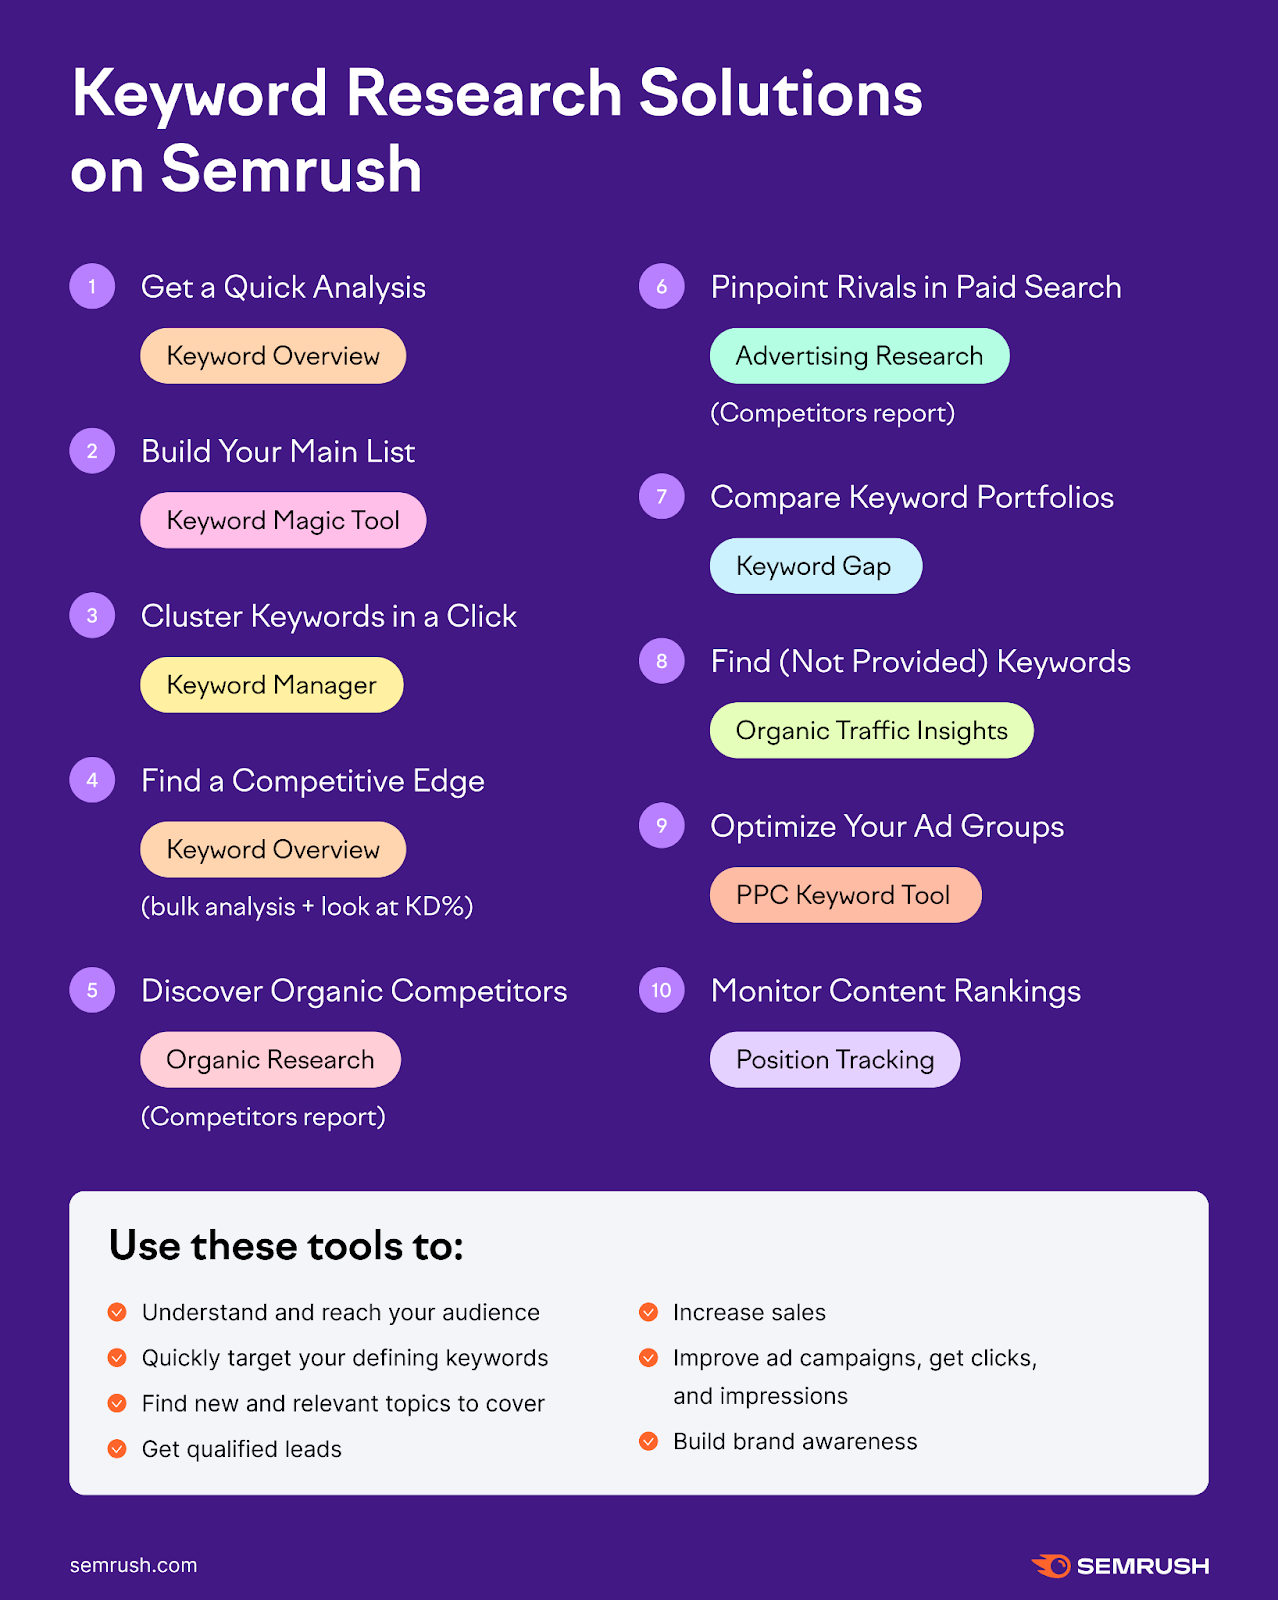 An infographic listing keyword research solutions on Semrush